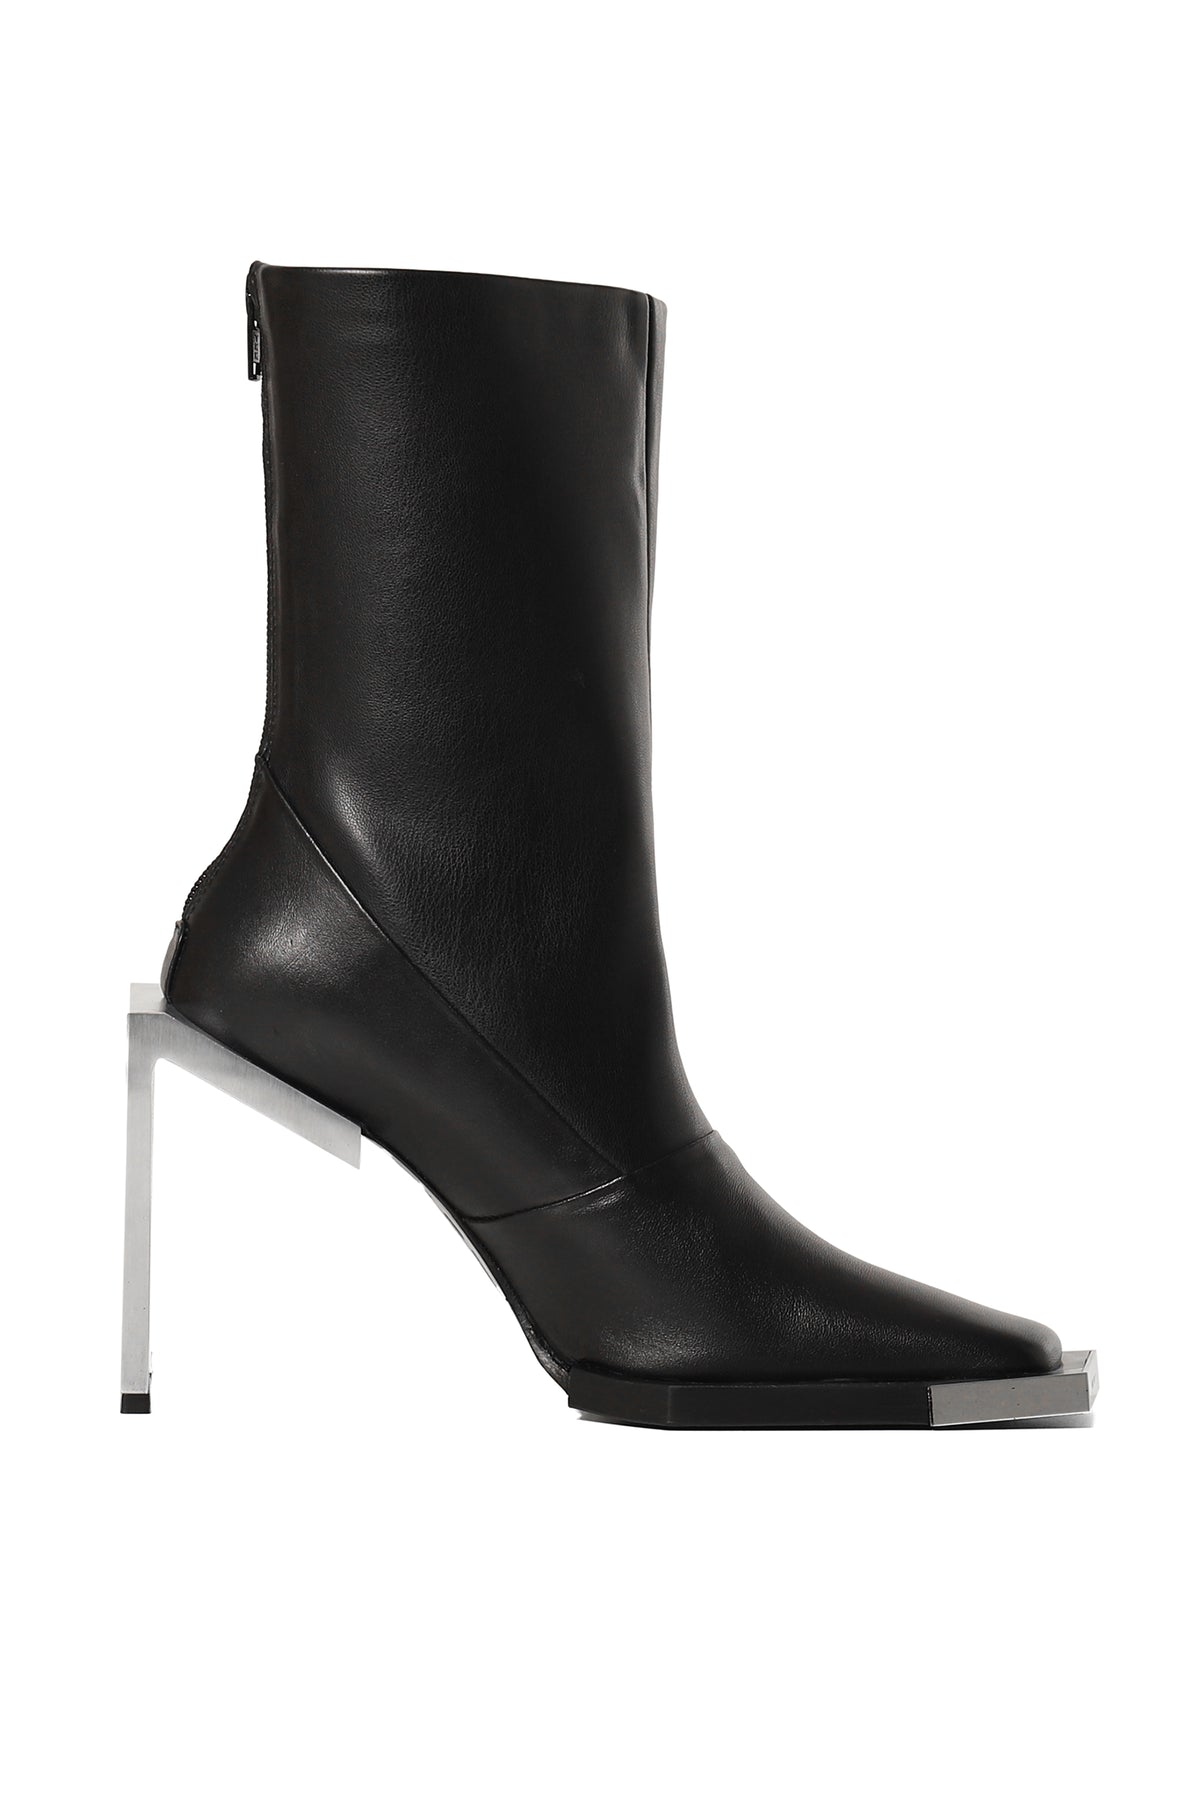 ANKLE-HIGH BOOTS / BLK